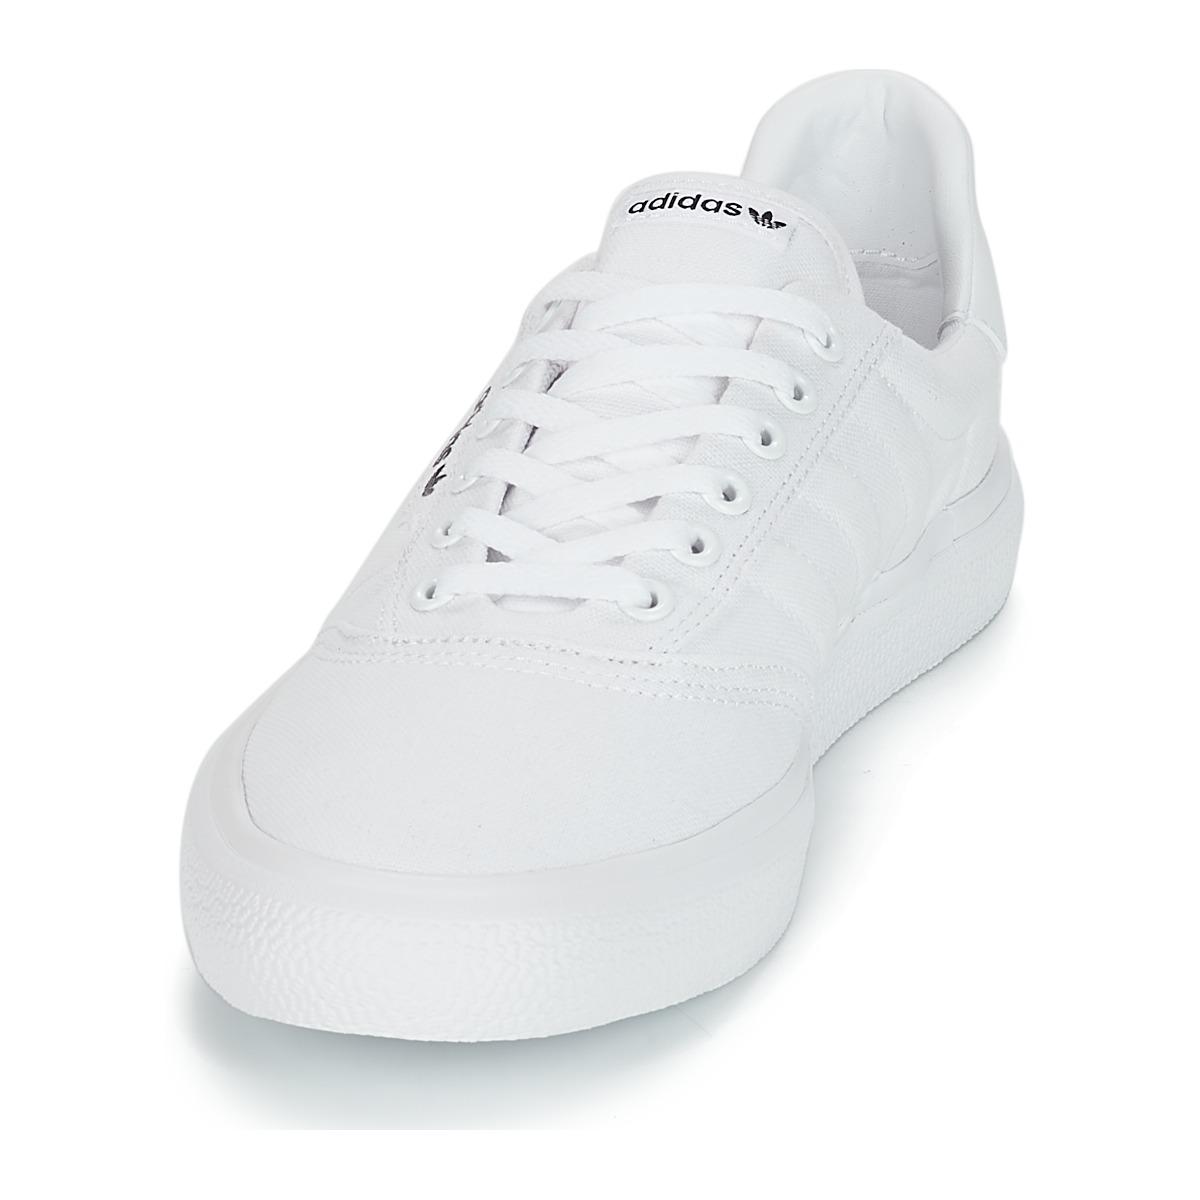 adidas Originals Rubber 3mc Trainers in White for Men - Save 42% | Lyst UK